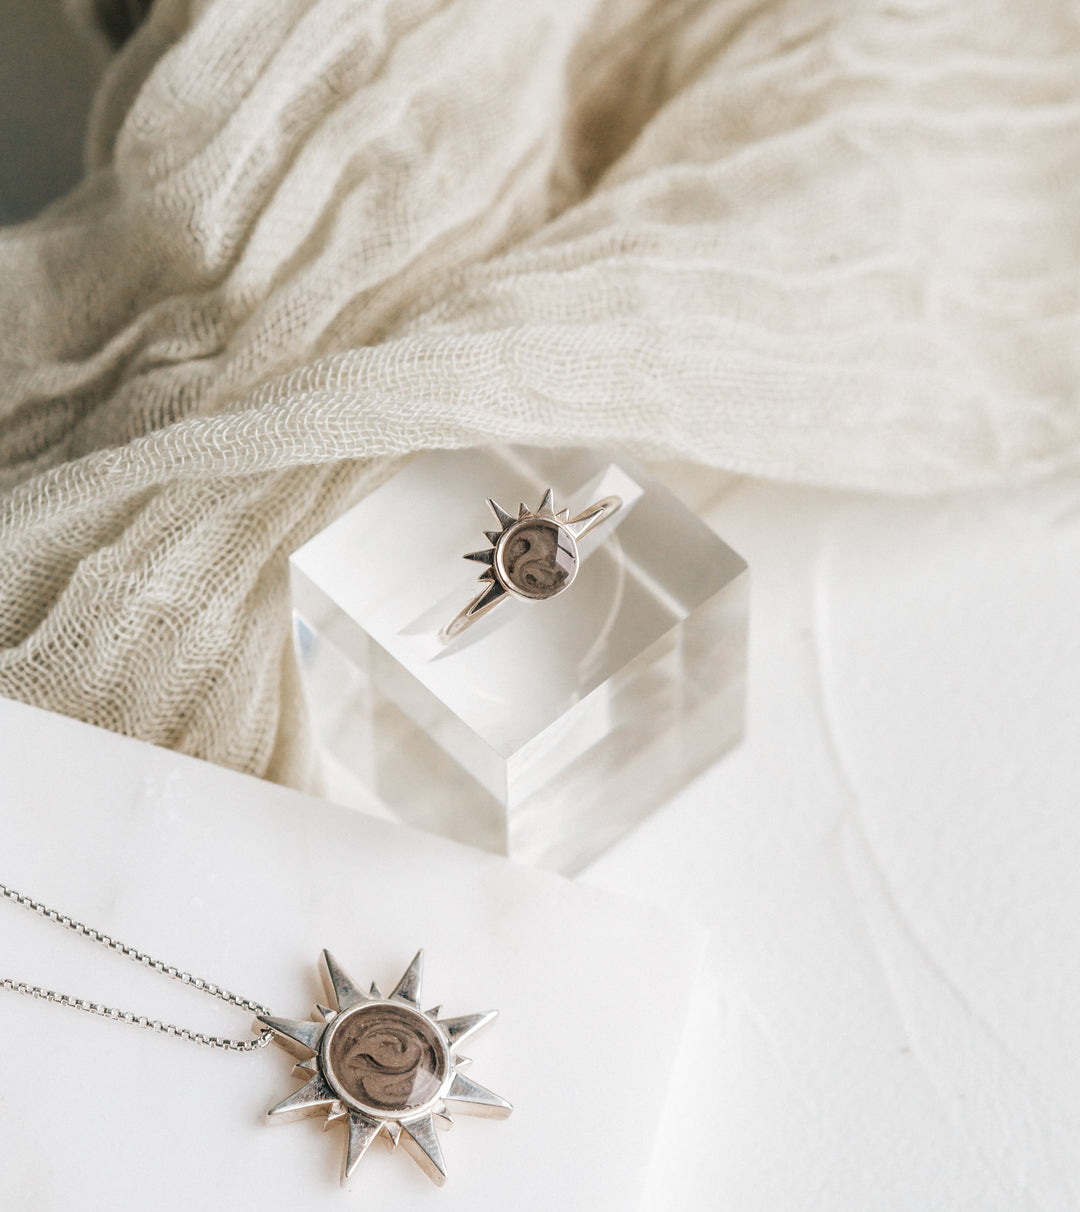 Pictured here are Sterling Silver Cremation Jewelry pieces from close by me jewelry's Celestial Collection with Sun themes stylized on a white background with multiple textures